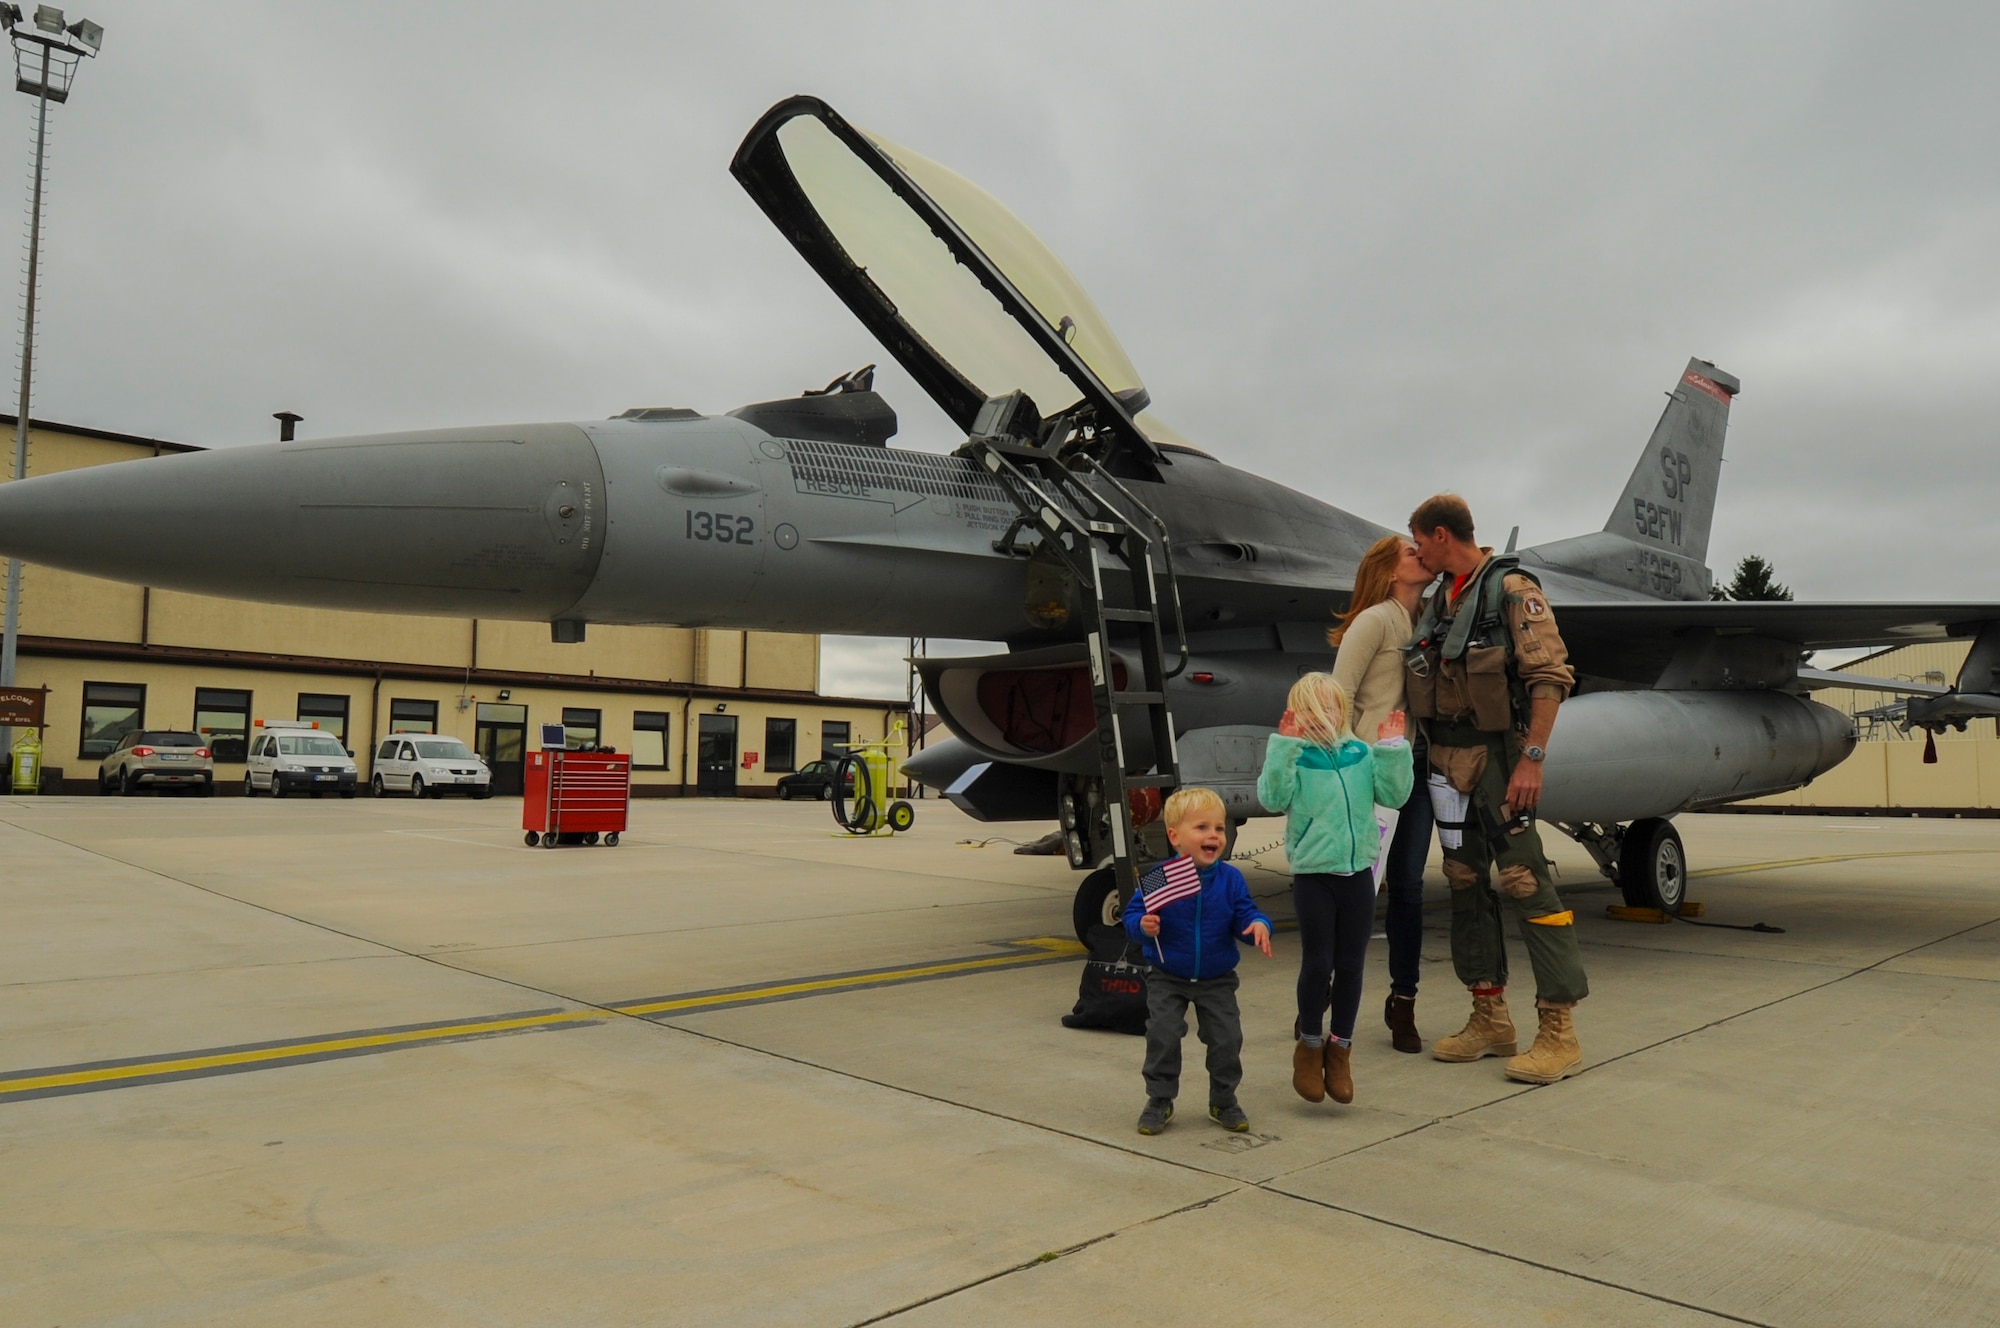 An Airman assigned to the 480th Expeditionary Fighter Squadron reunites with his family during the squadron’s return to Spangdahlem Air Base, Germany, Oct. 6, 2016. Approximately 300 of the Airmen, who serve in flight, maintenance or support roles for the F-16 Fighting Falcon fighter aircraft, completed a six-month deployment to Southwest Asia by providing close air support and dynamic targeting operations as part of the squadron’s first deployment in support of Operation Inherent Resolve. Operation Inherent Resolve aims to eliminate the Da'esh terrorist group and the threat they pose to Iraq, Syria and the wider international community. (U.S. Air Force photo by Staff Sgt. Joe W. McFadden)